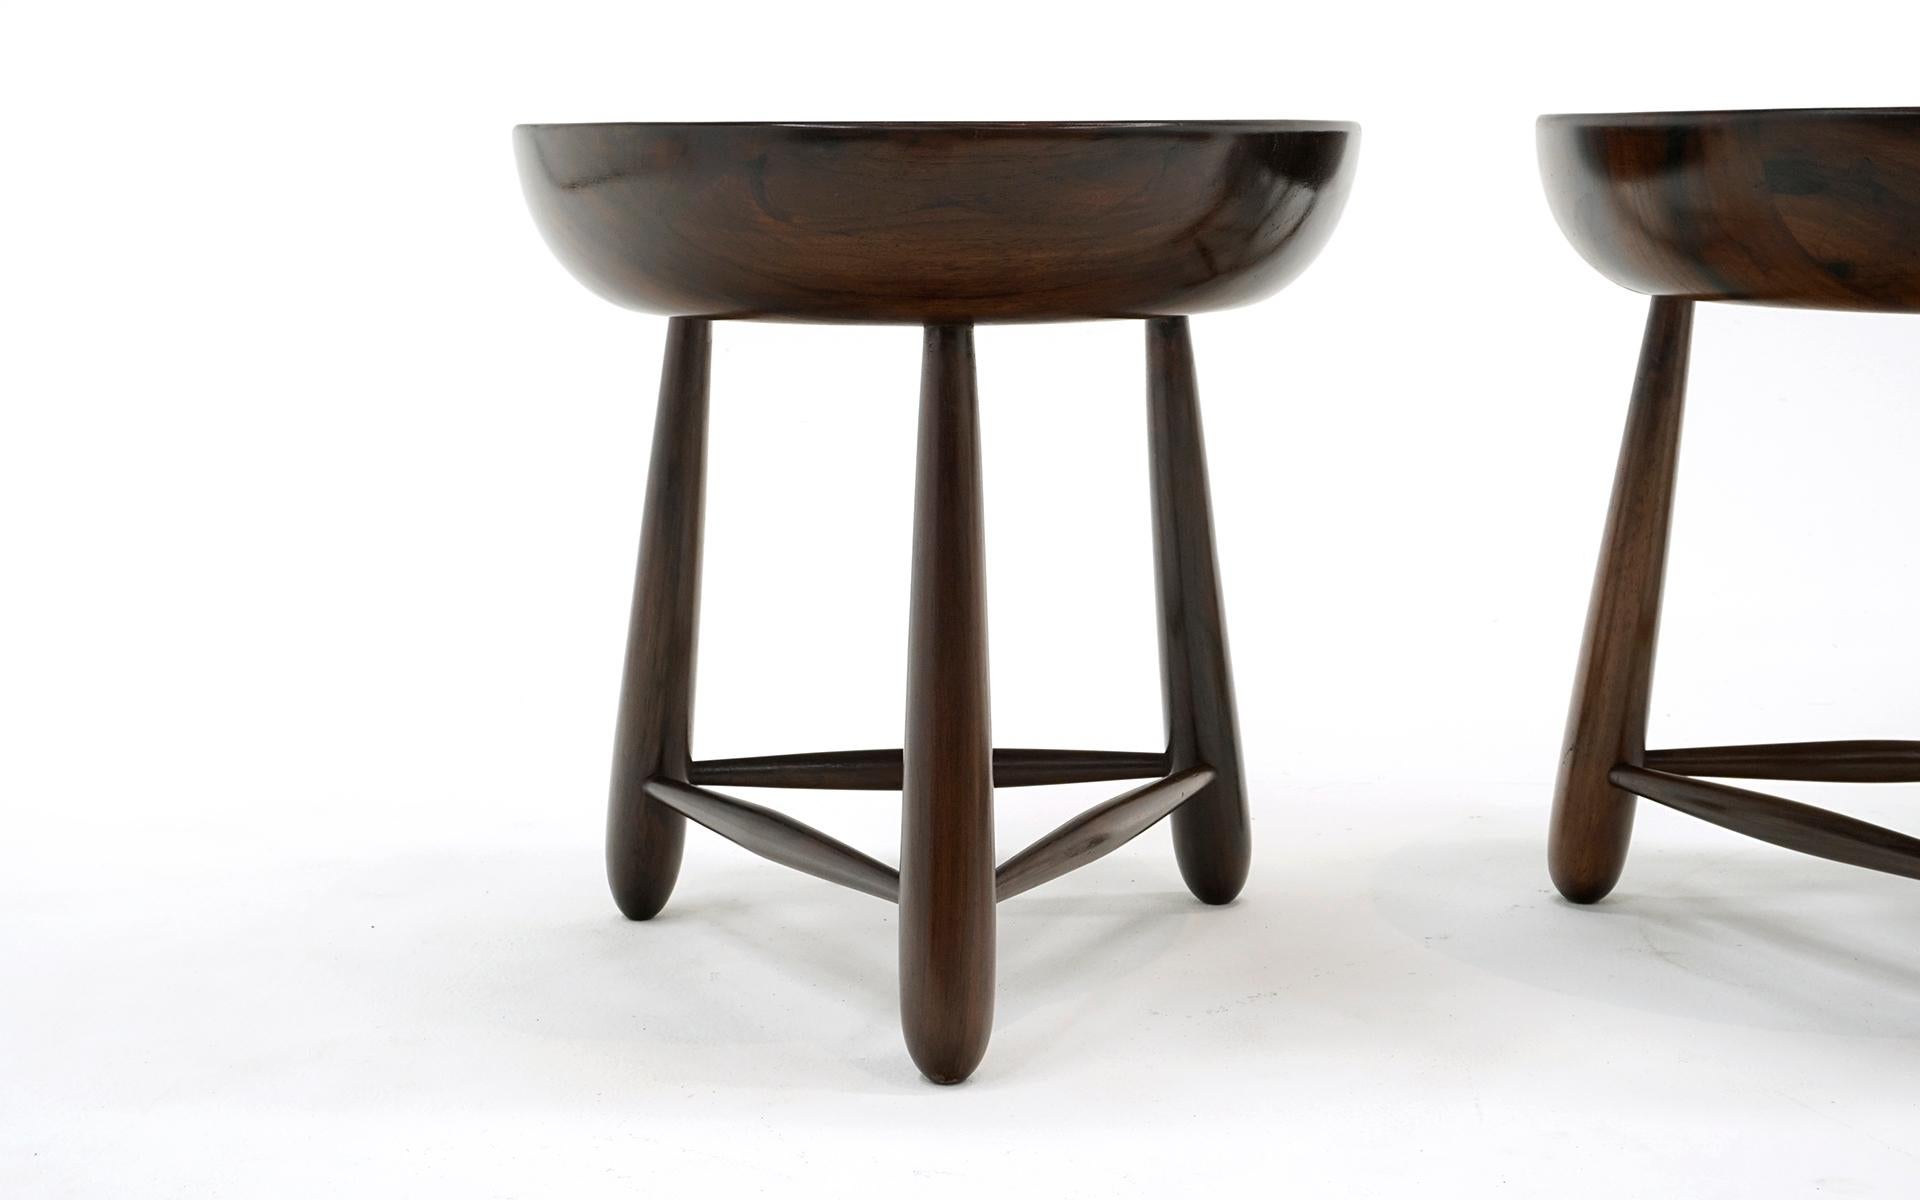 Brazilian Mocho Stool in Rosewood by  Sergio Rodrigues for Oca, Brazil, 1954. Signed. For Sale